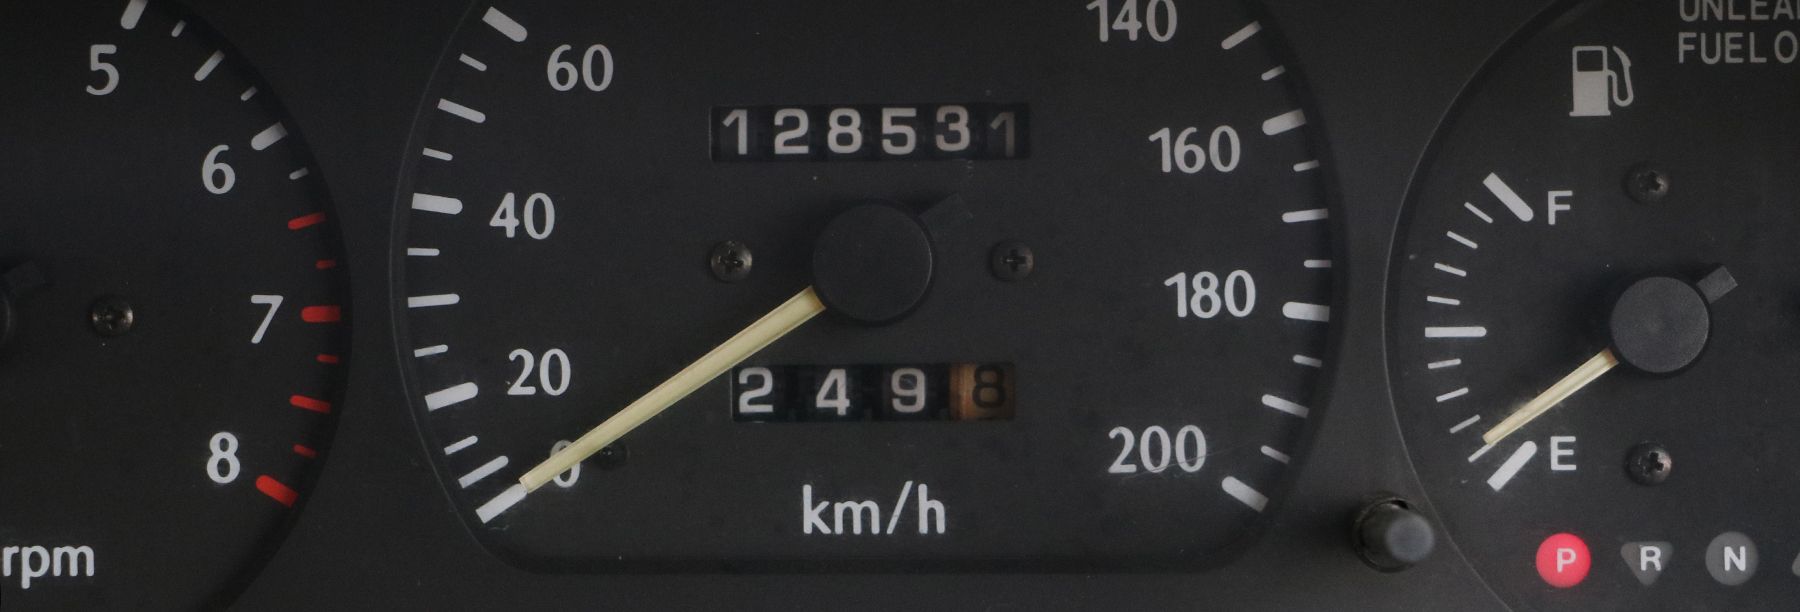 Five Second-Hand Car Facts That Might Surprise You - Auto Pedigree